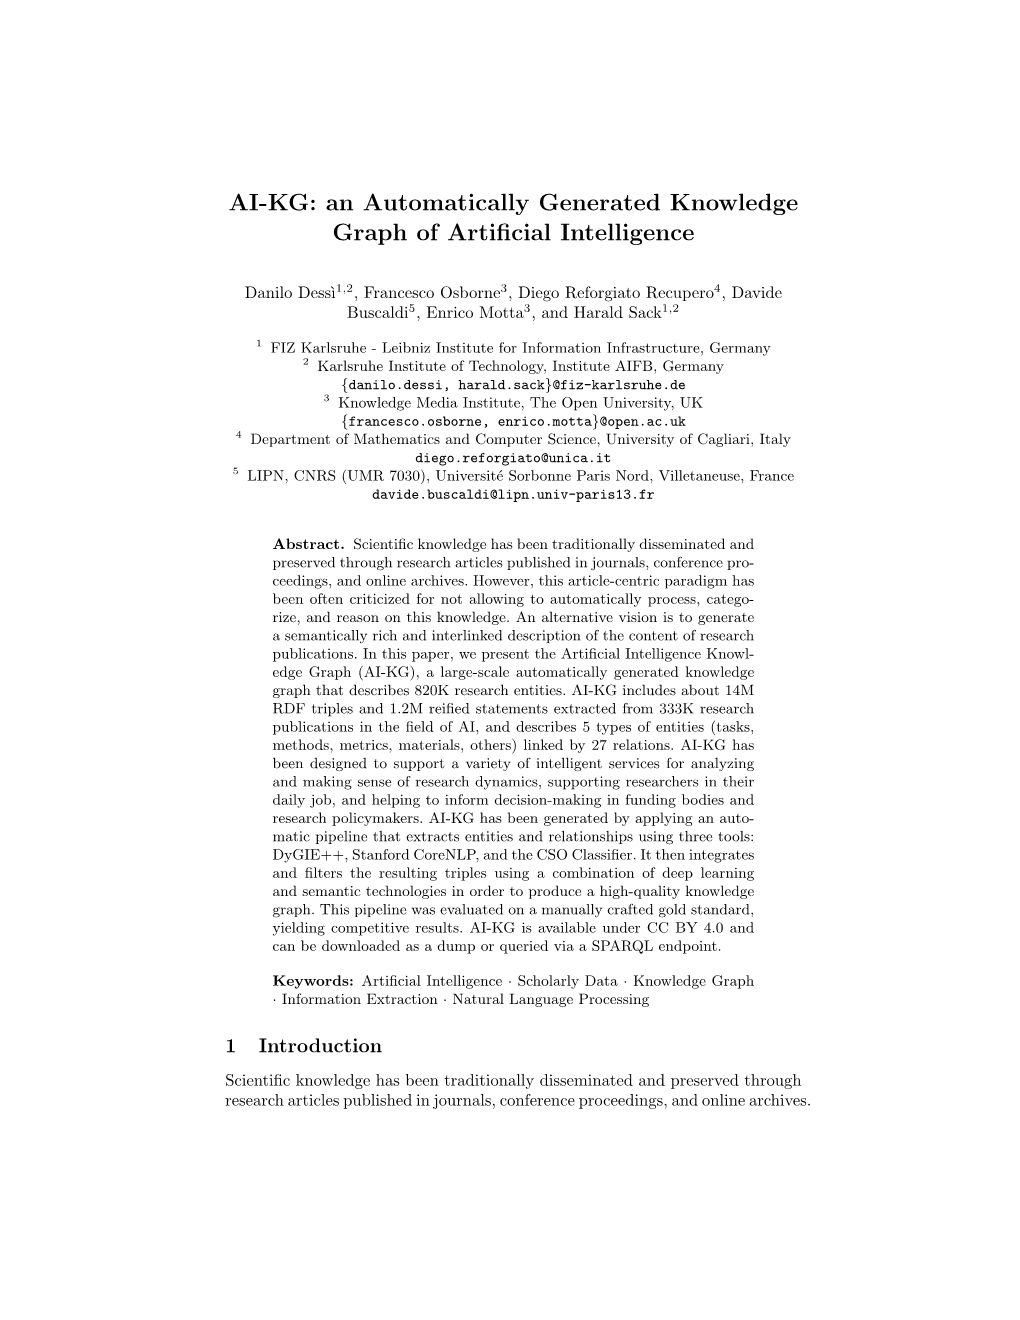 AI-KG: an Automatically Generated Knowledge Graph of Artificial Intelligence